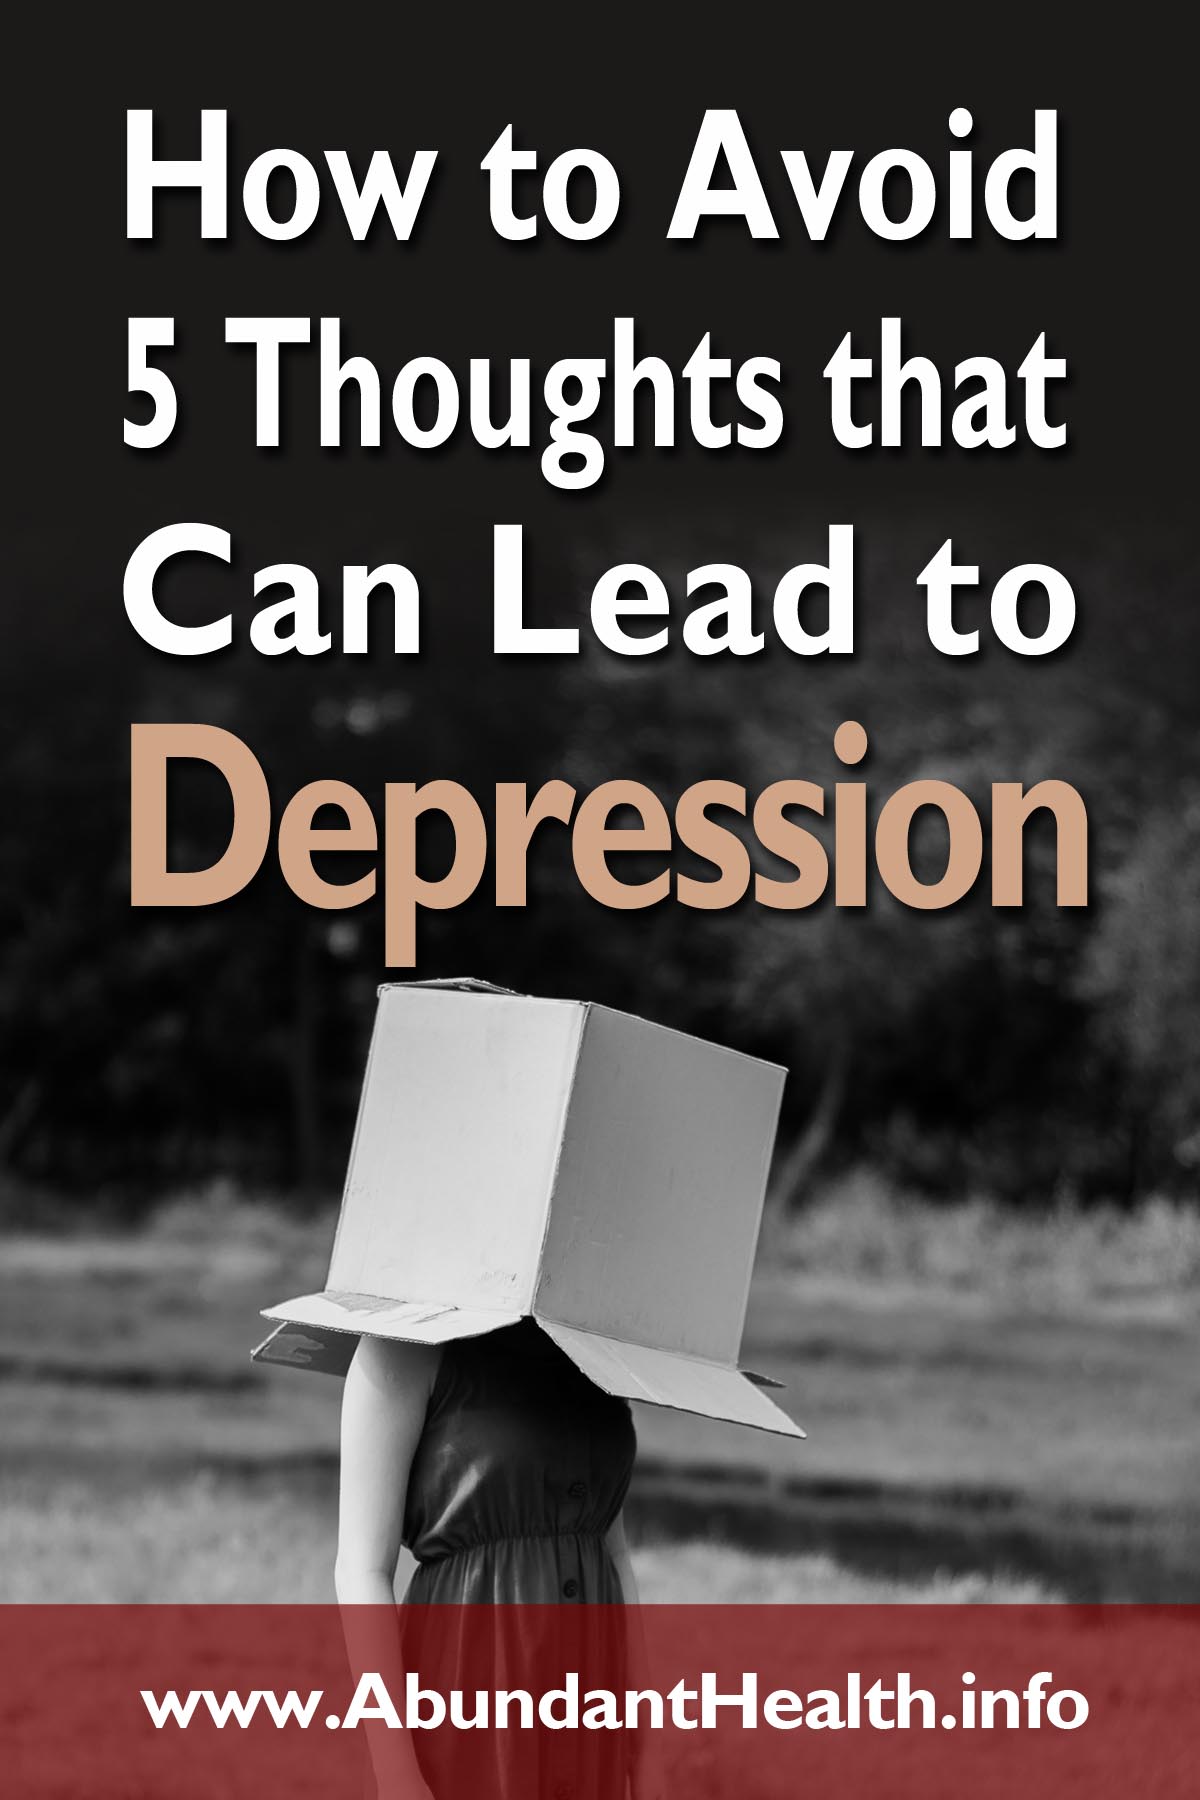 How to Avoid 5 Thoughts That Can Lead to Depression